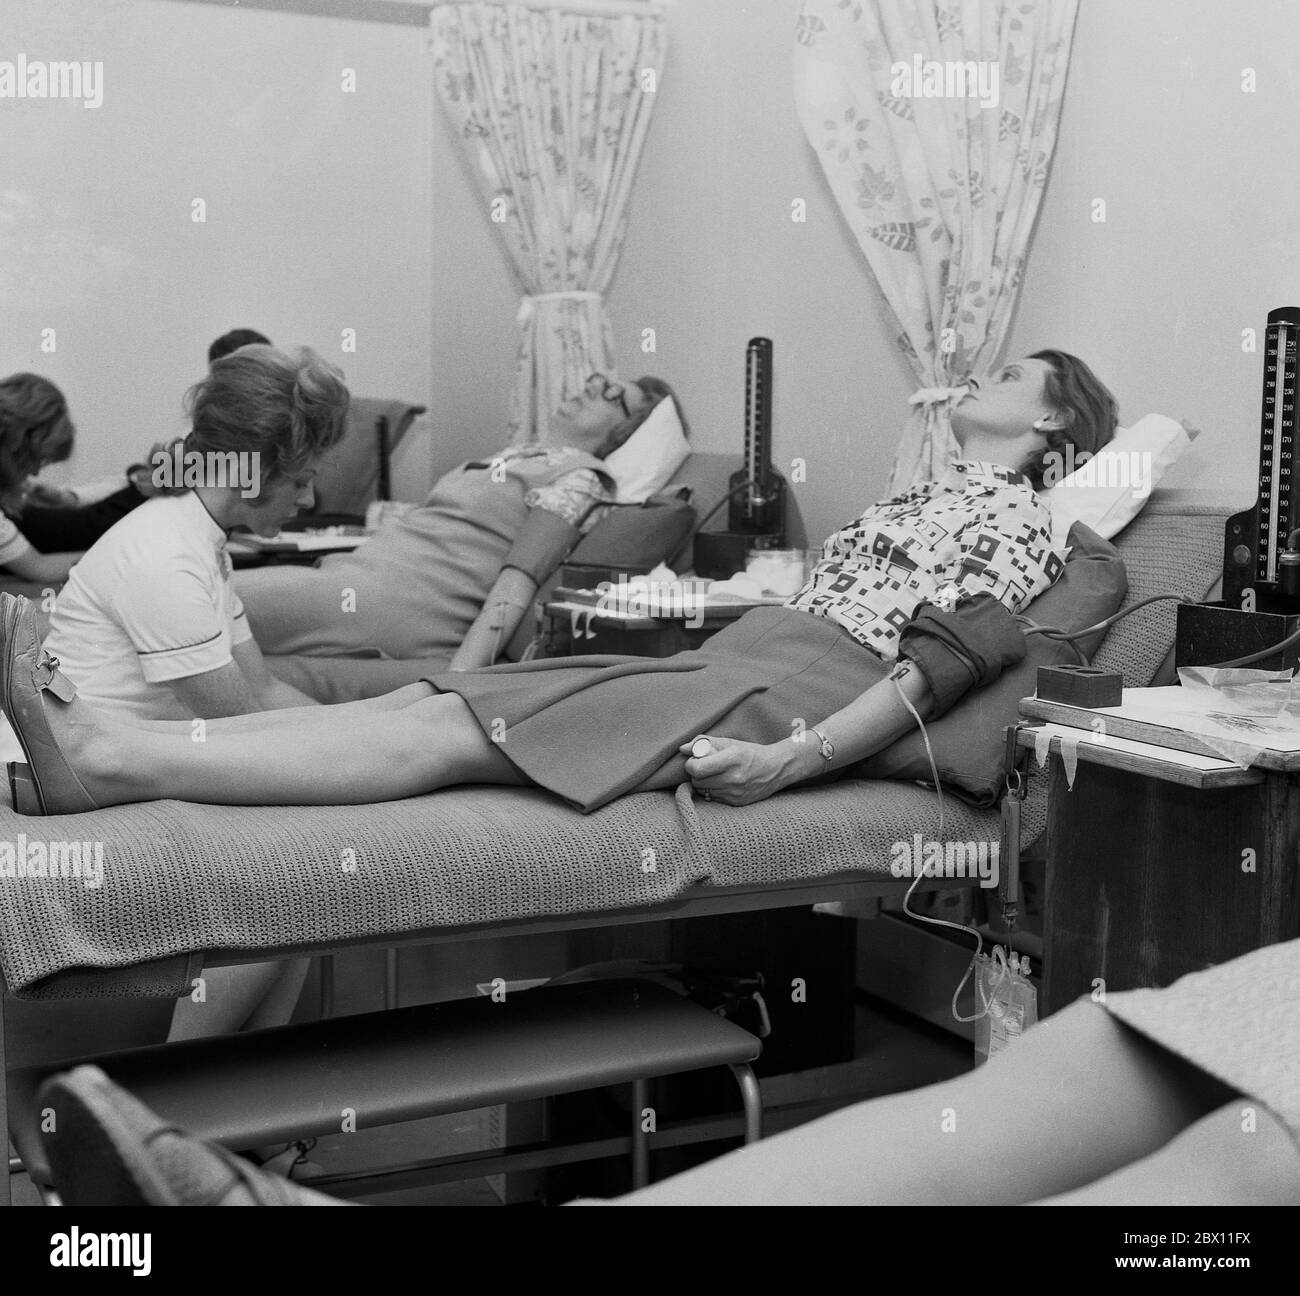 'Blood donation', attended by a female nurse, a lady lying on a blanket on a surgical bed in a medical or health centre giving blood from her arm, Lewisham, South London, late 60s, early 1970s. Stock Photo